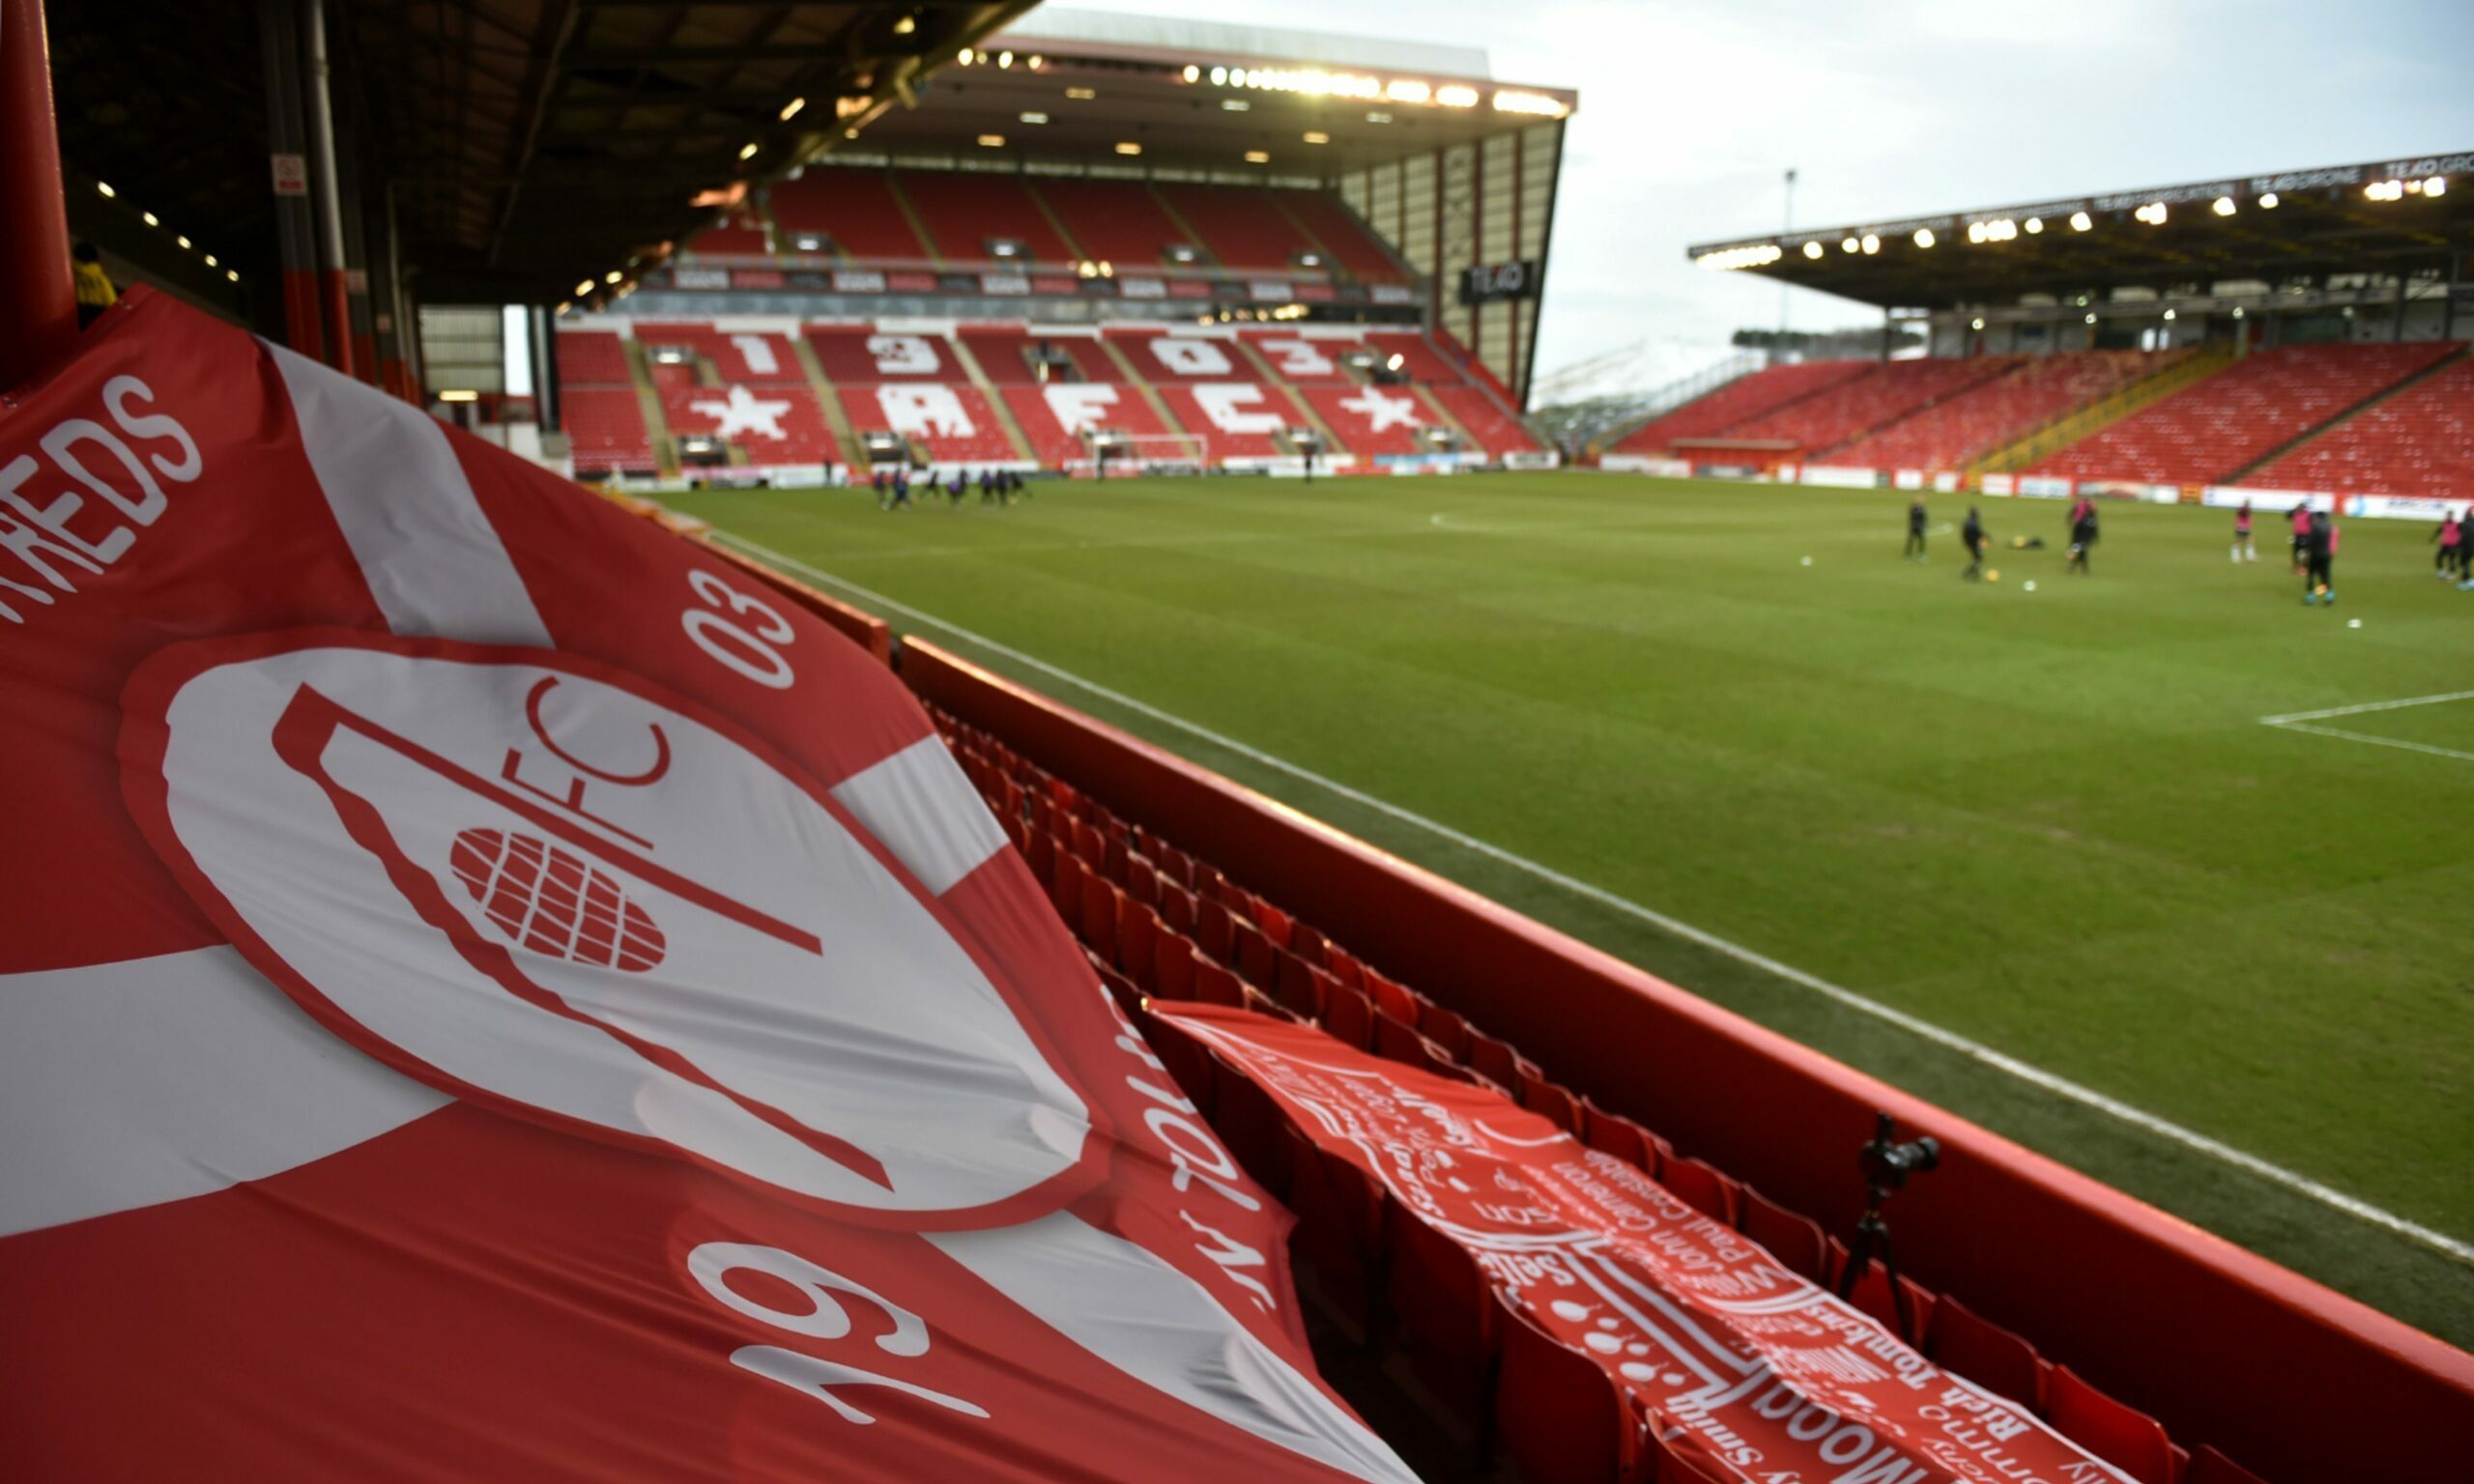 Aberdeen Women will play their first ever game at Pittodrie on Wednesday evening when they host Rangers.